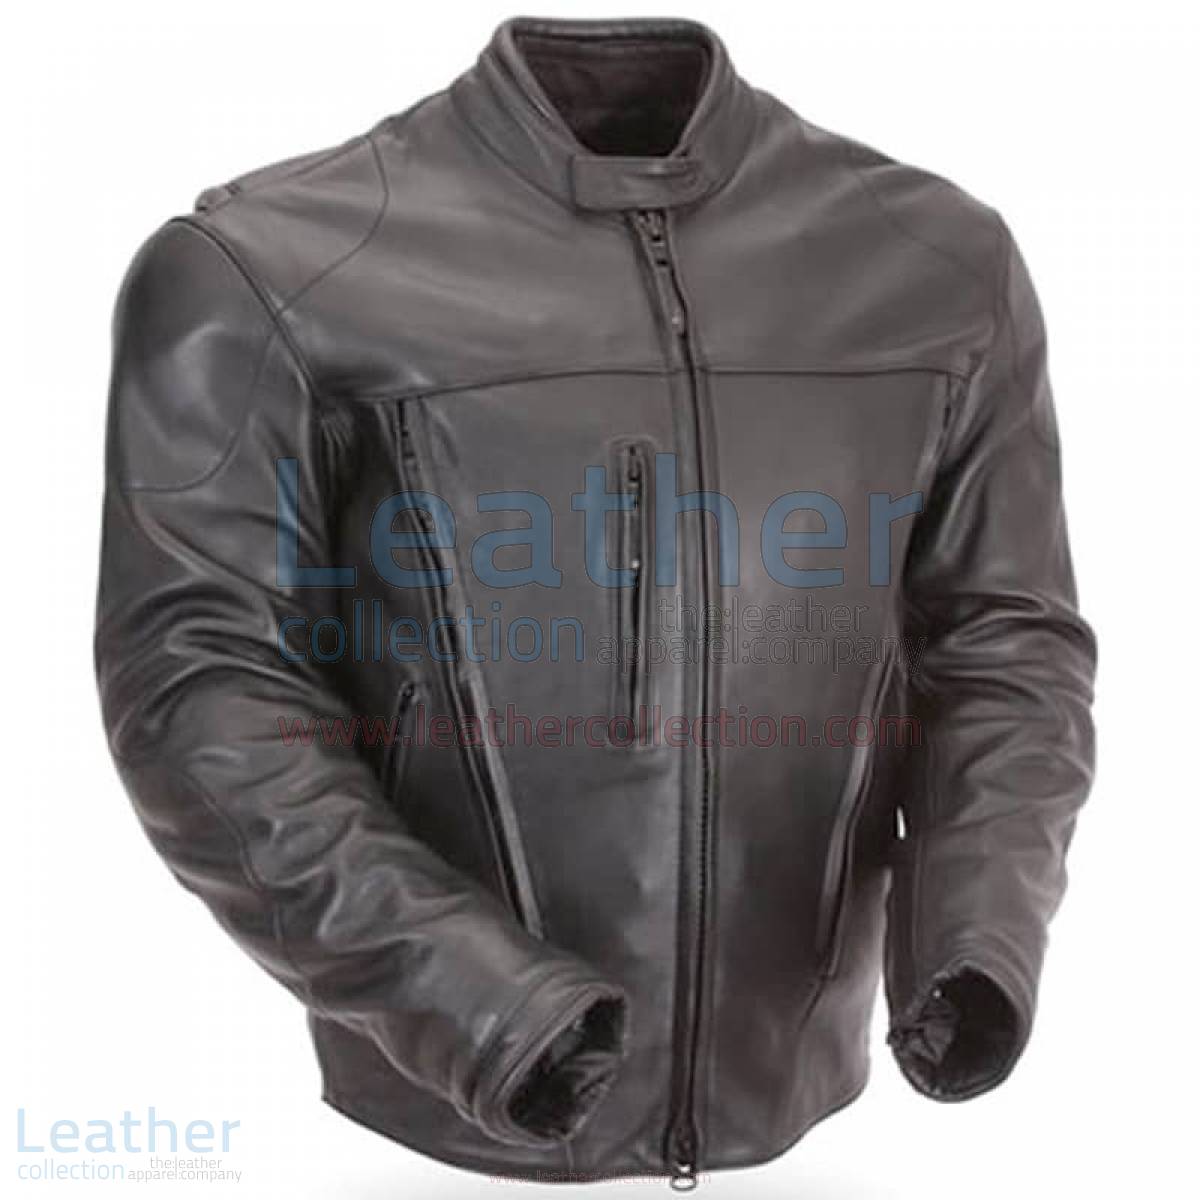 Waterproof Armored Leather Motorcycle Jacket with CE Armor –  Jacket